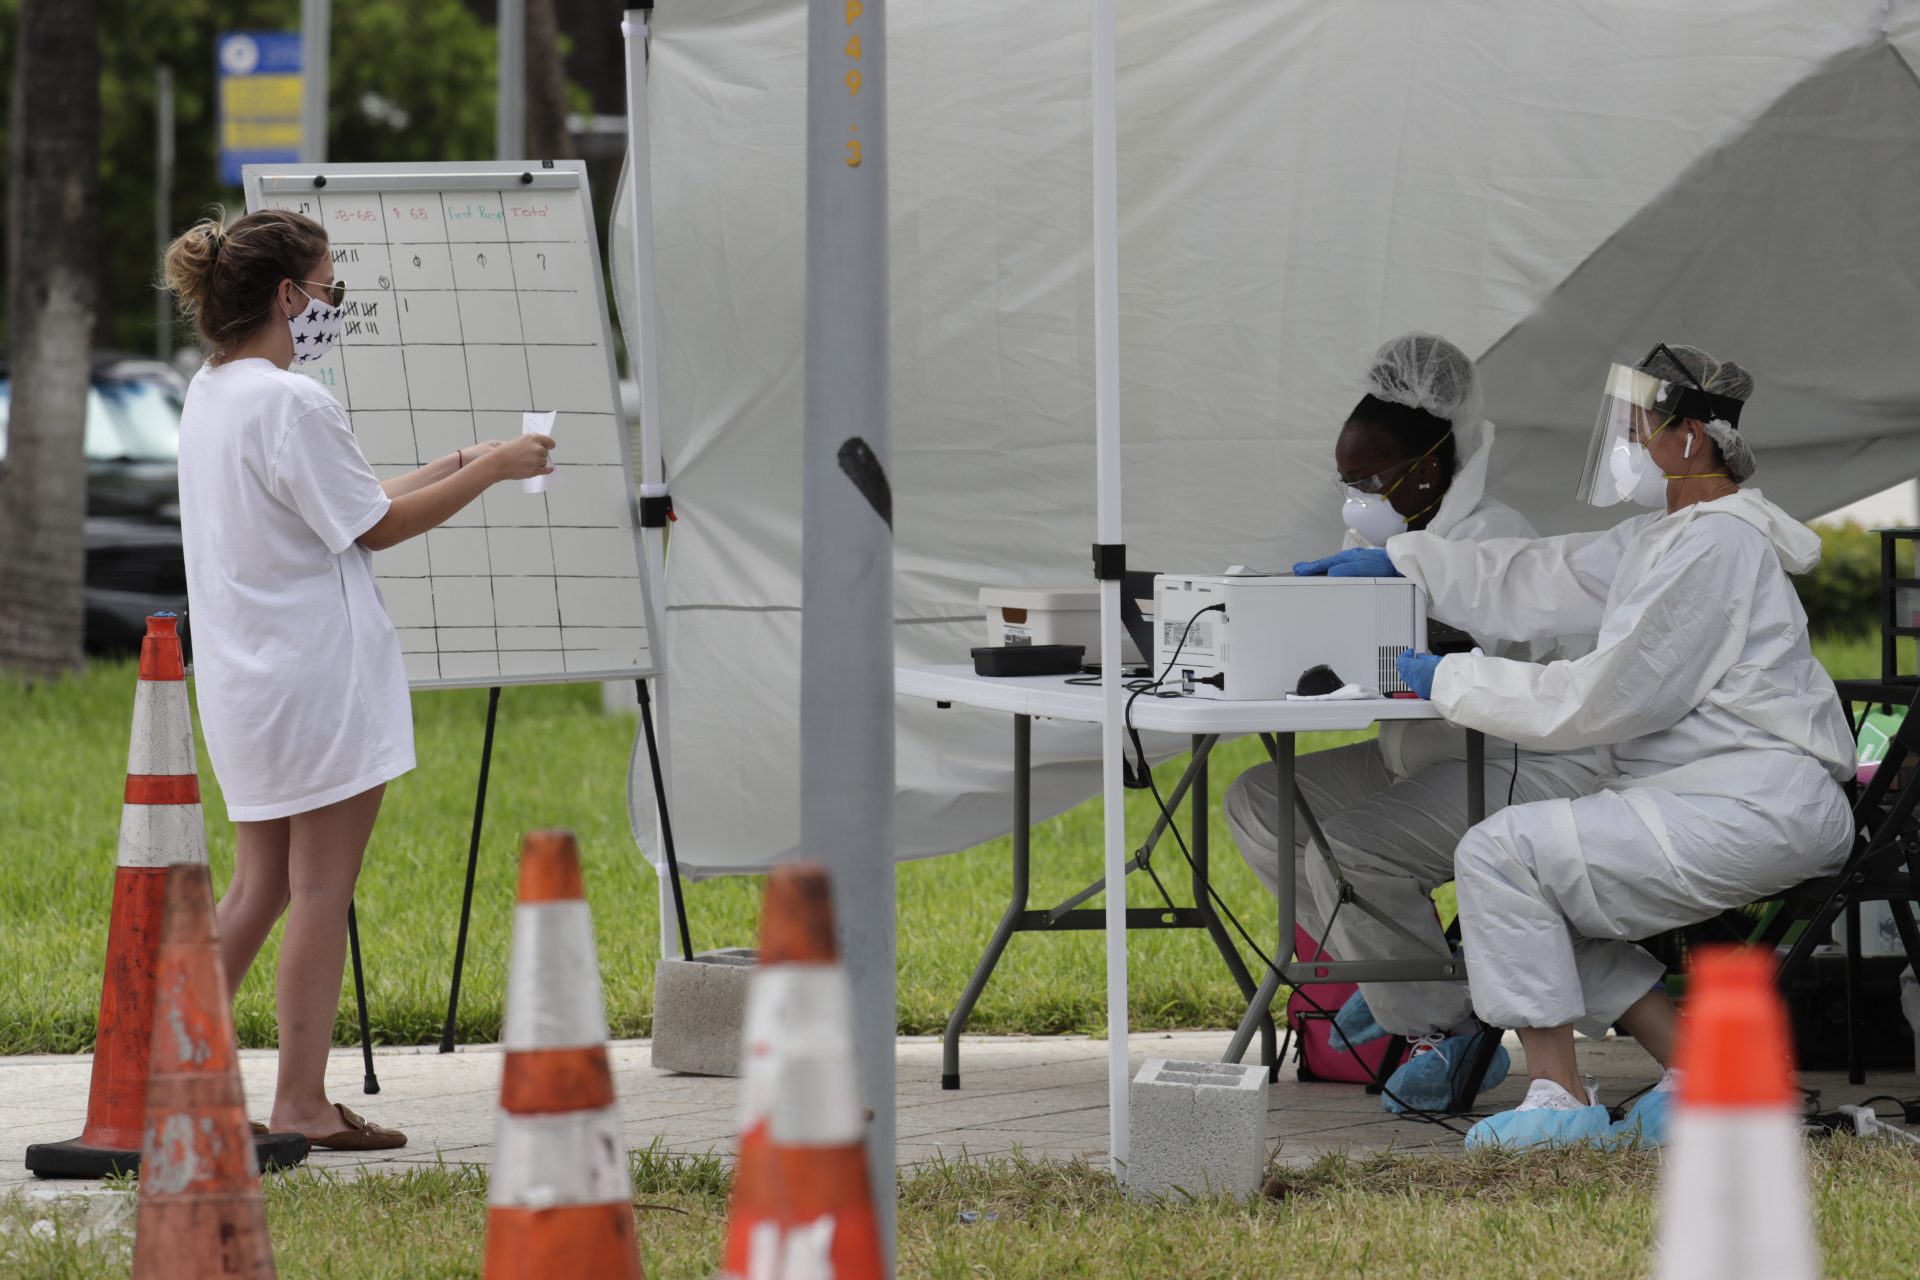 In this Friday, July 17, 2020 file photo, health care workers take information from people in line at a walk-up COVID-19 testing site during the coronavirus pandemic in Miami Beach, Fla. After months of struggling to ramp up coronavirus testing, the U.S. is now capable of testing some 3 million people daily thanks to a growing supply of rapid tests. But the testing boom comes with a new challenge: keeping track of the results.